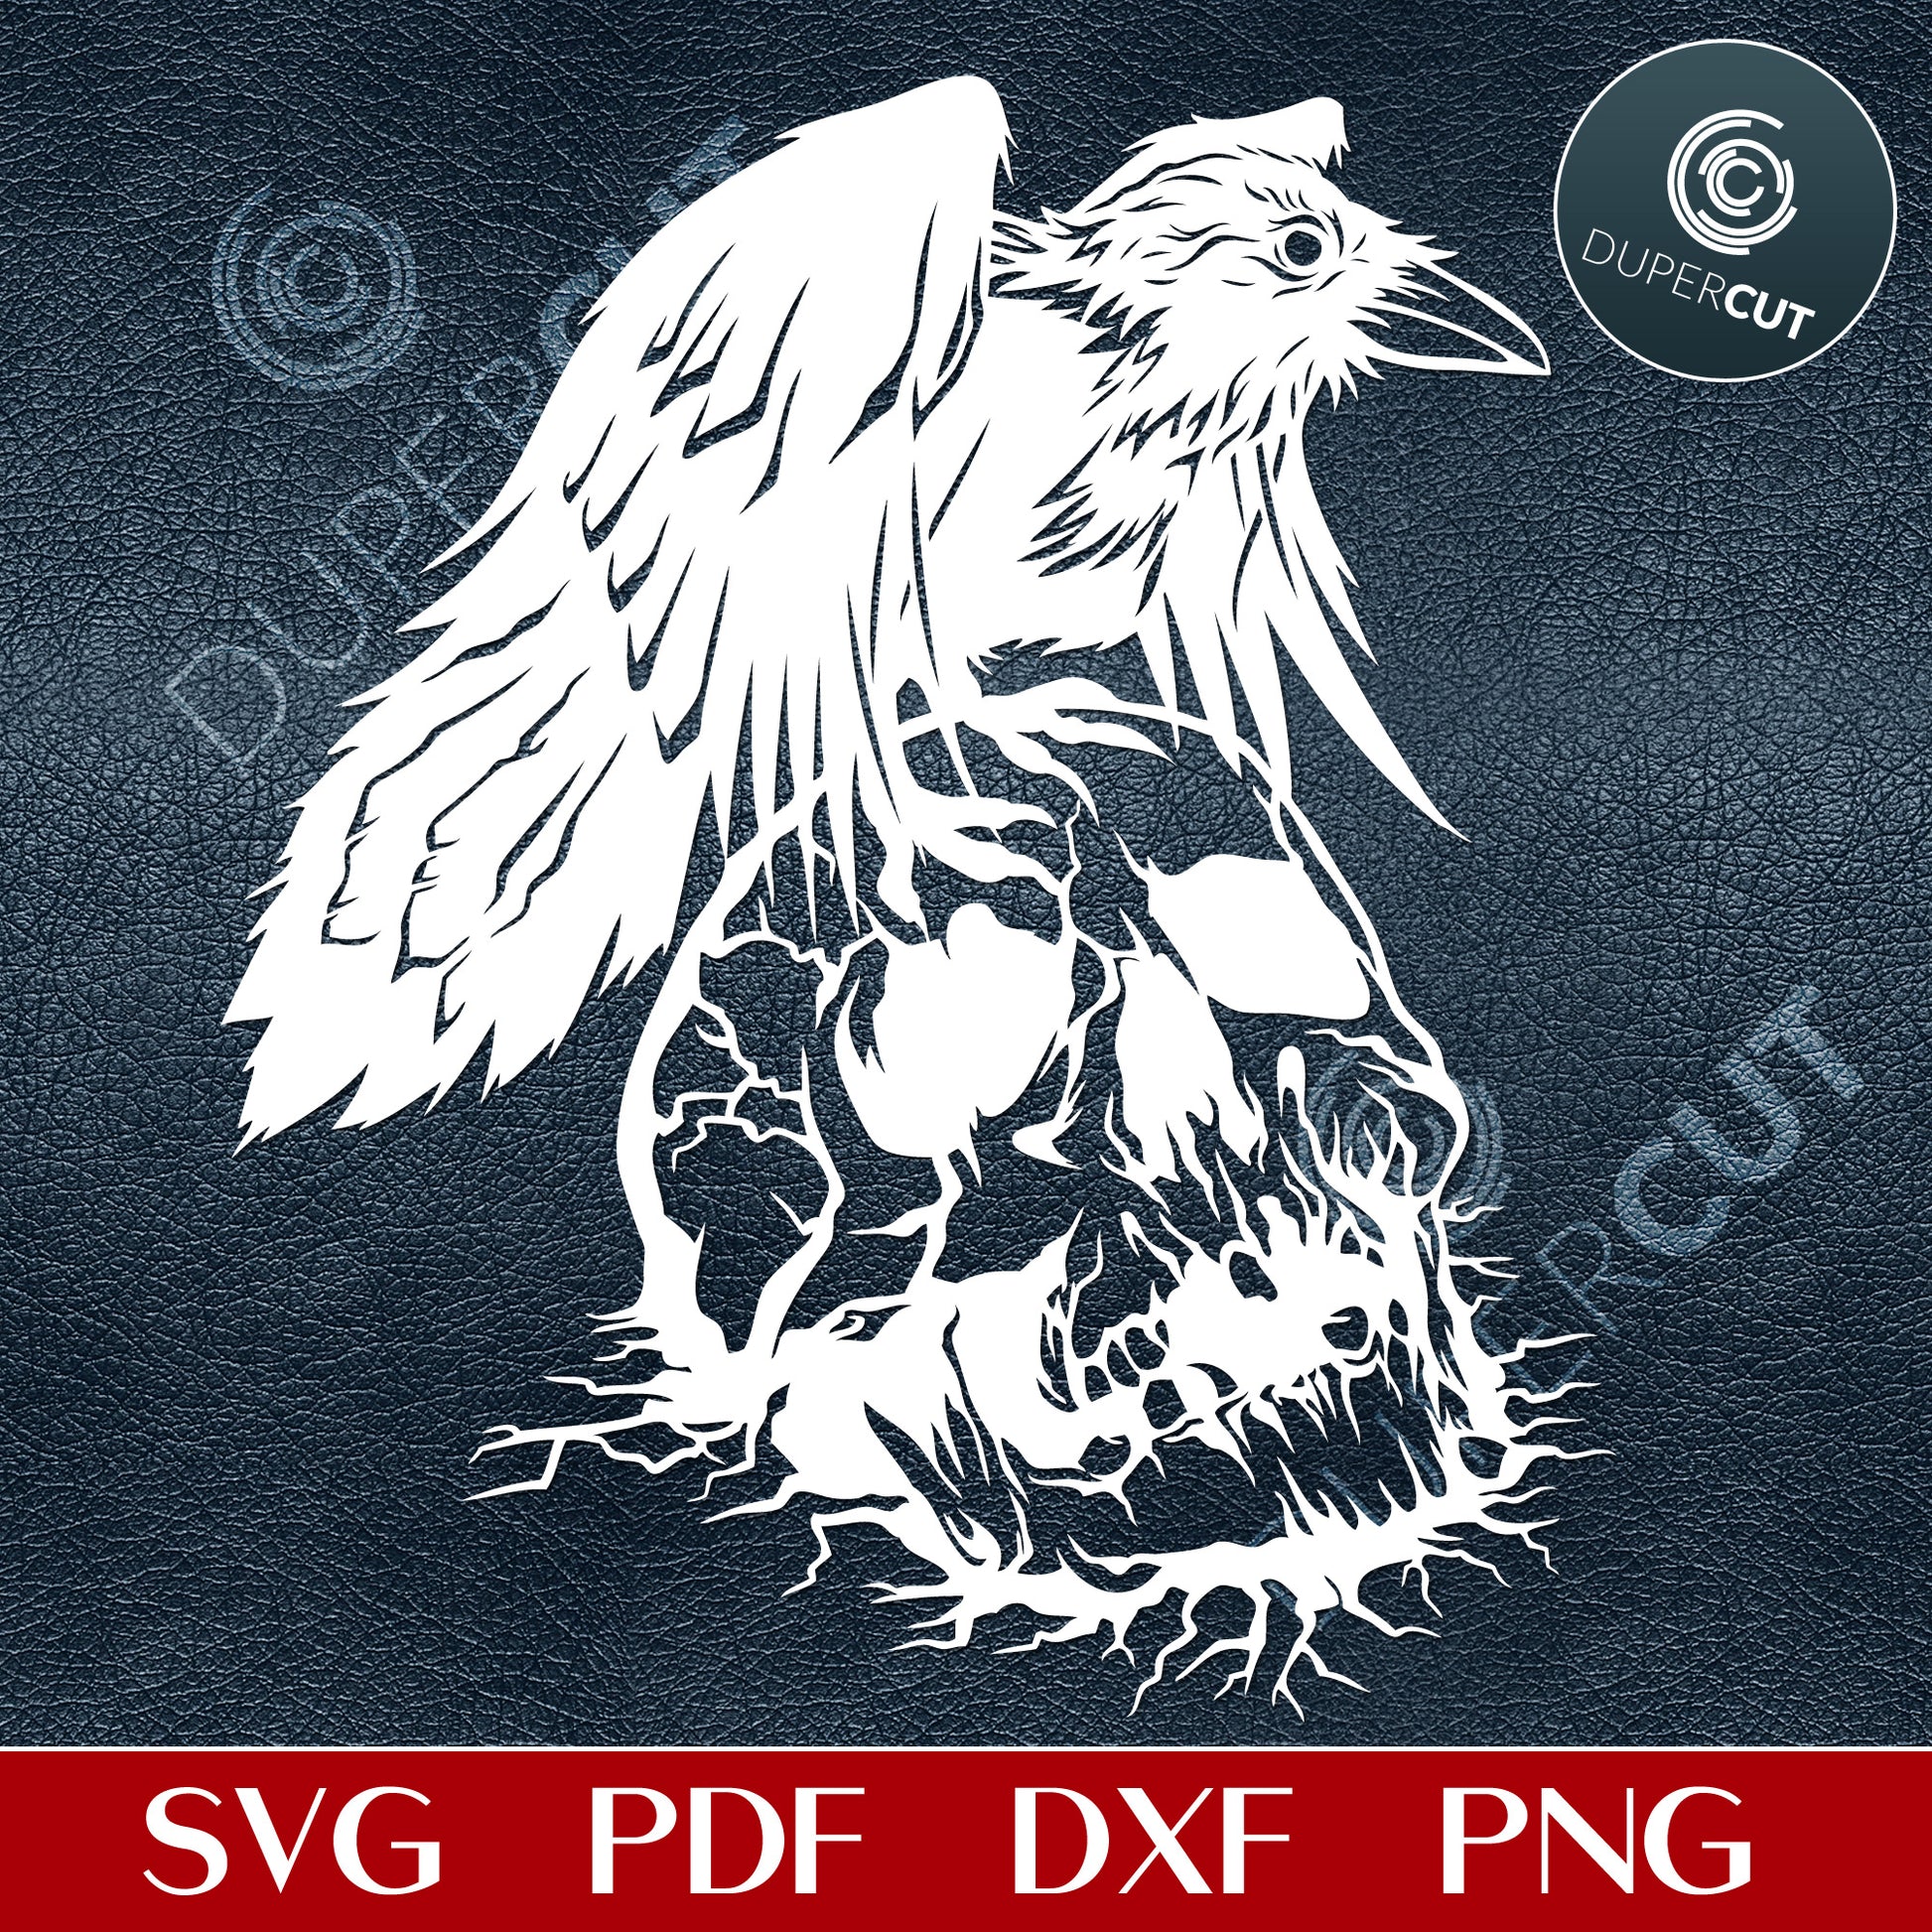 Raven with Skull, Paper Cutting Template, steampunk skull SVG PNG DXF cutting files for Cricut, Glowforge, Silhouette cameo, laser engraving